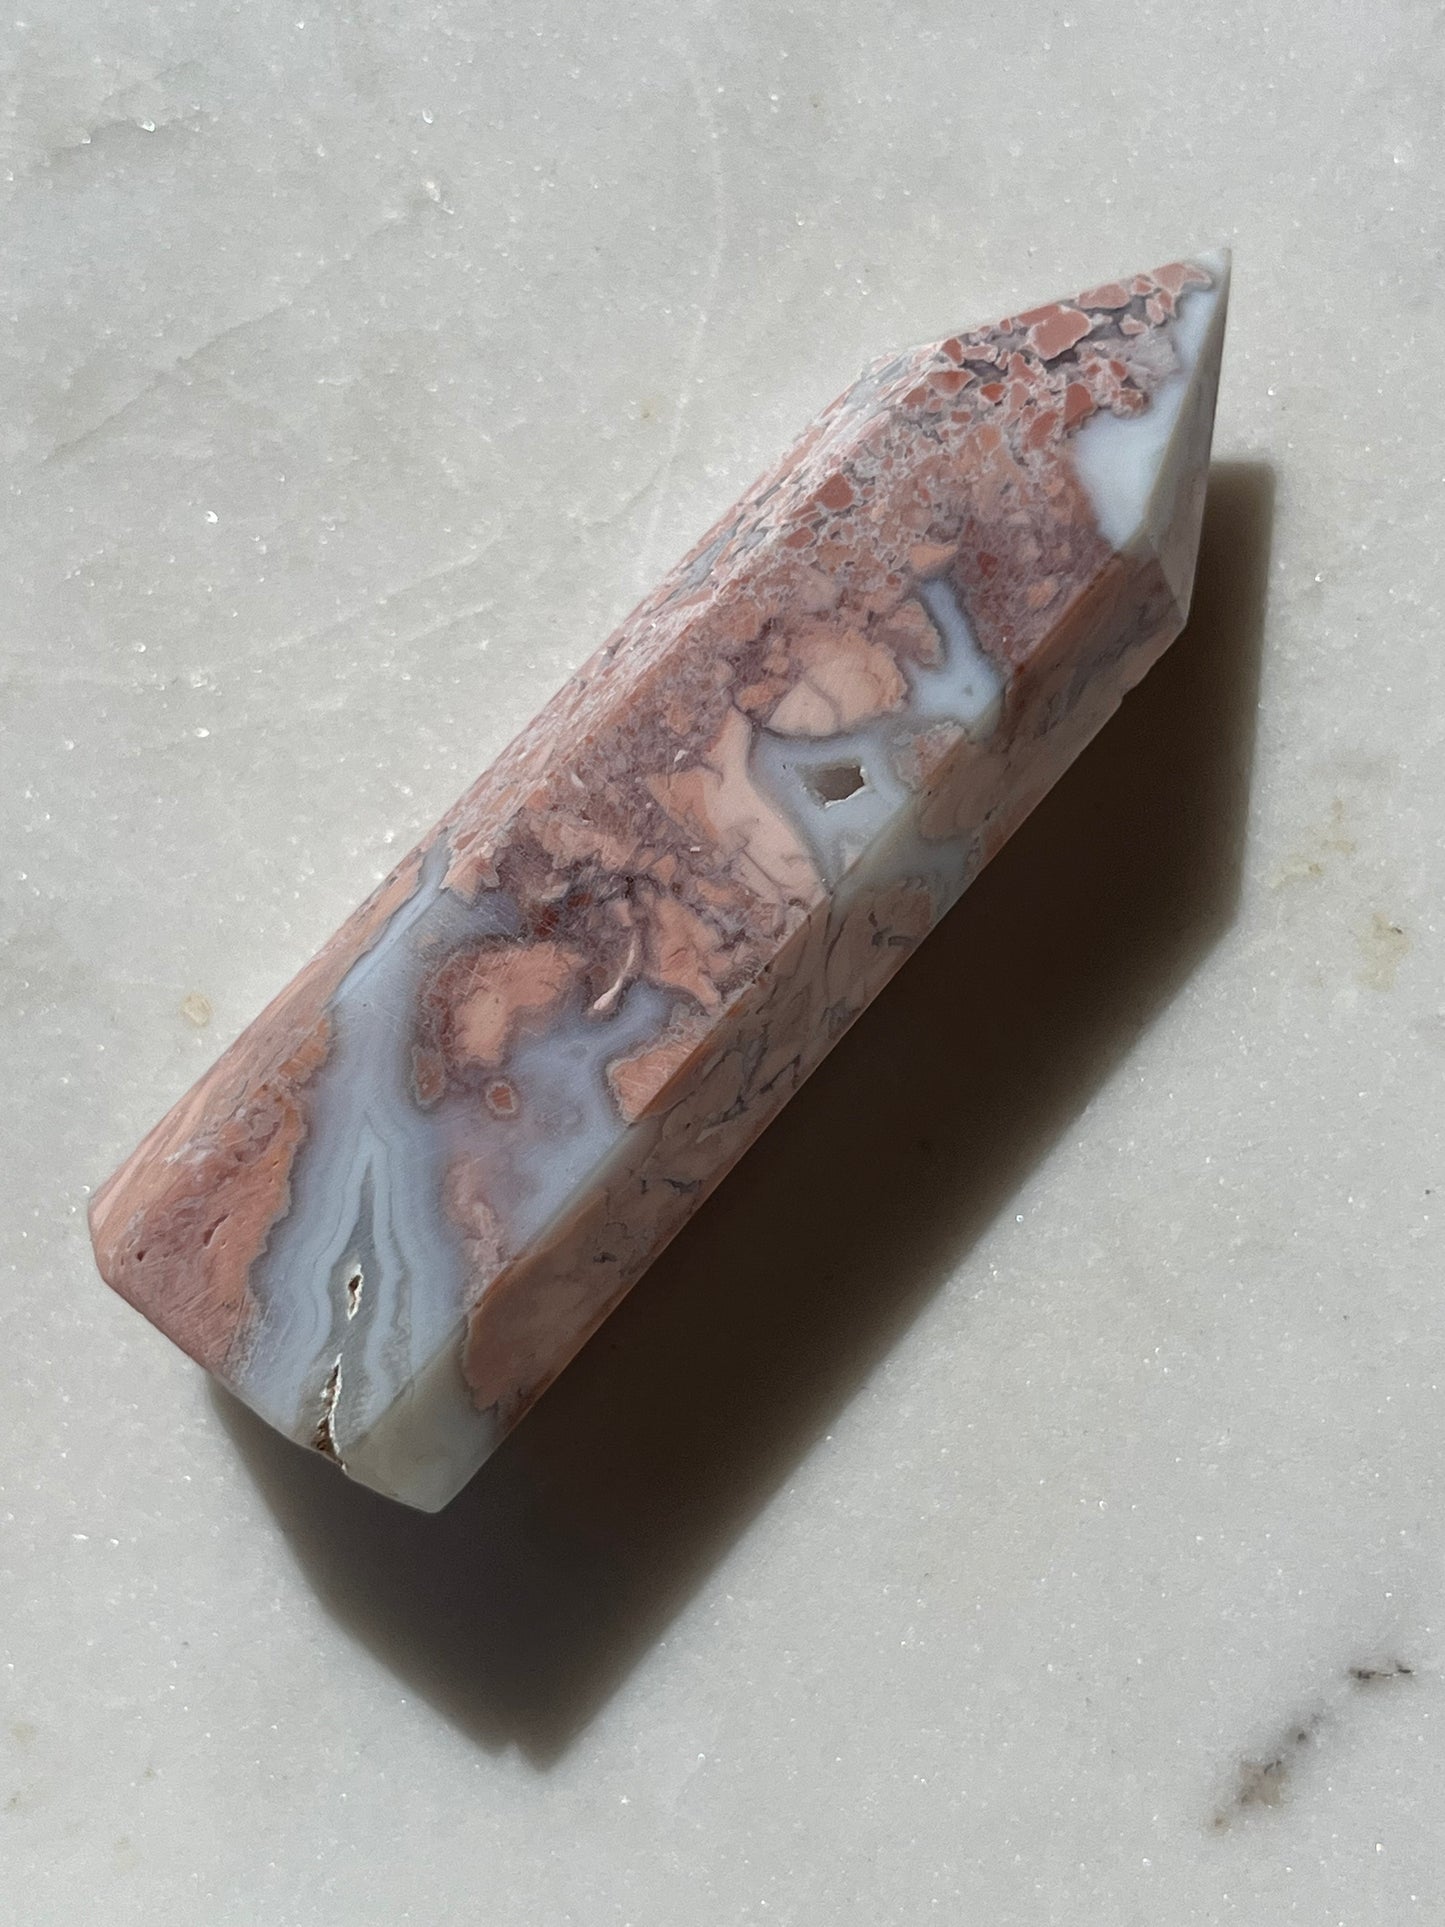 Cotton Candy Agate (Brecciated Jasper in Chalcedony)Tower #8